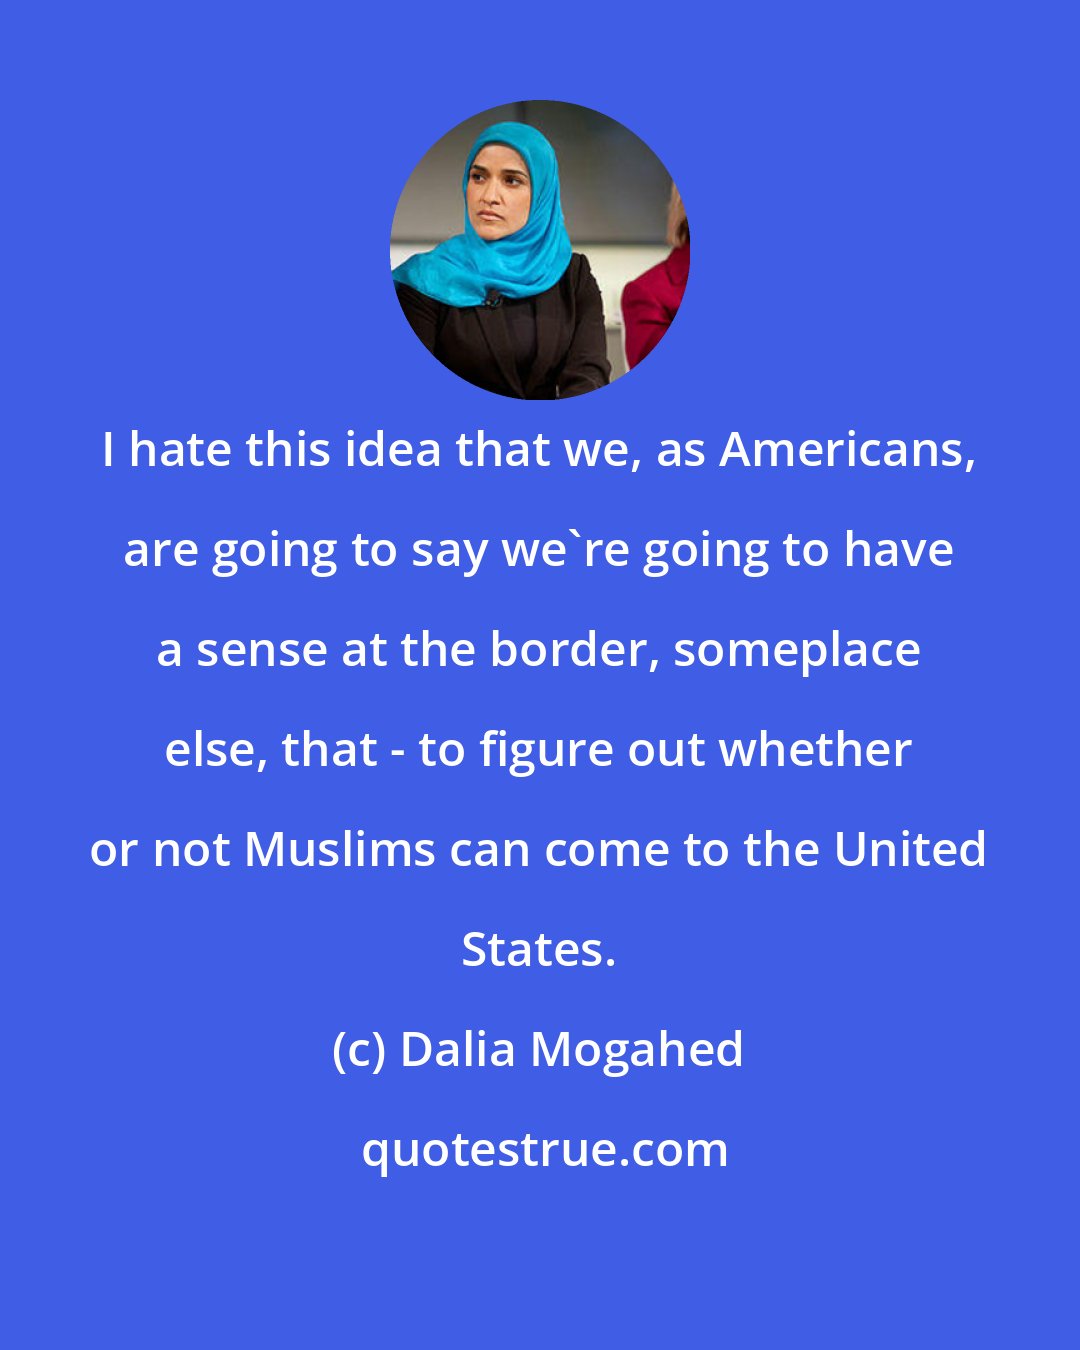 Dalia Mogahed: I hate this idea that we, as Americans, are going to say we're going to have a sense at the border, someplace else, that - to figure out whether or not Muslims can come to the United States.